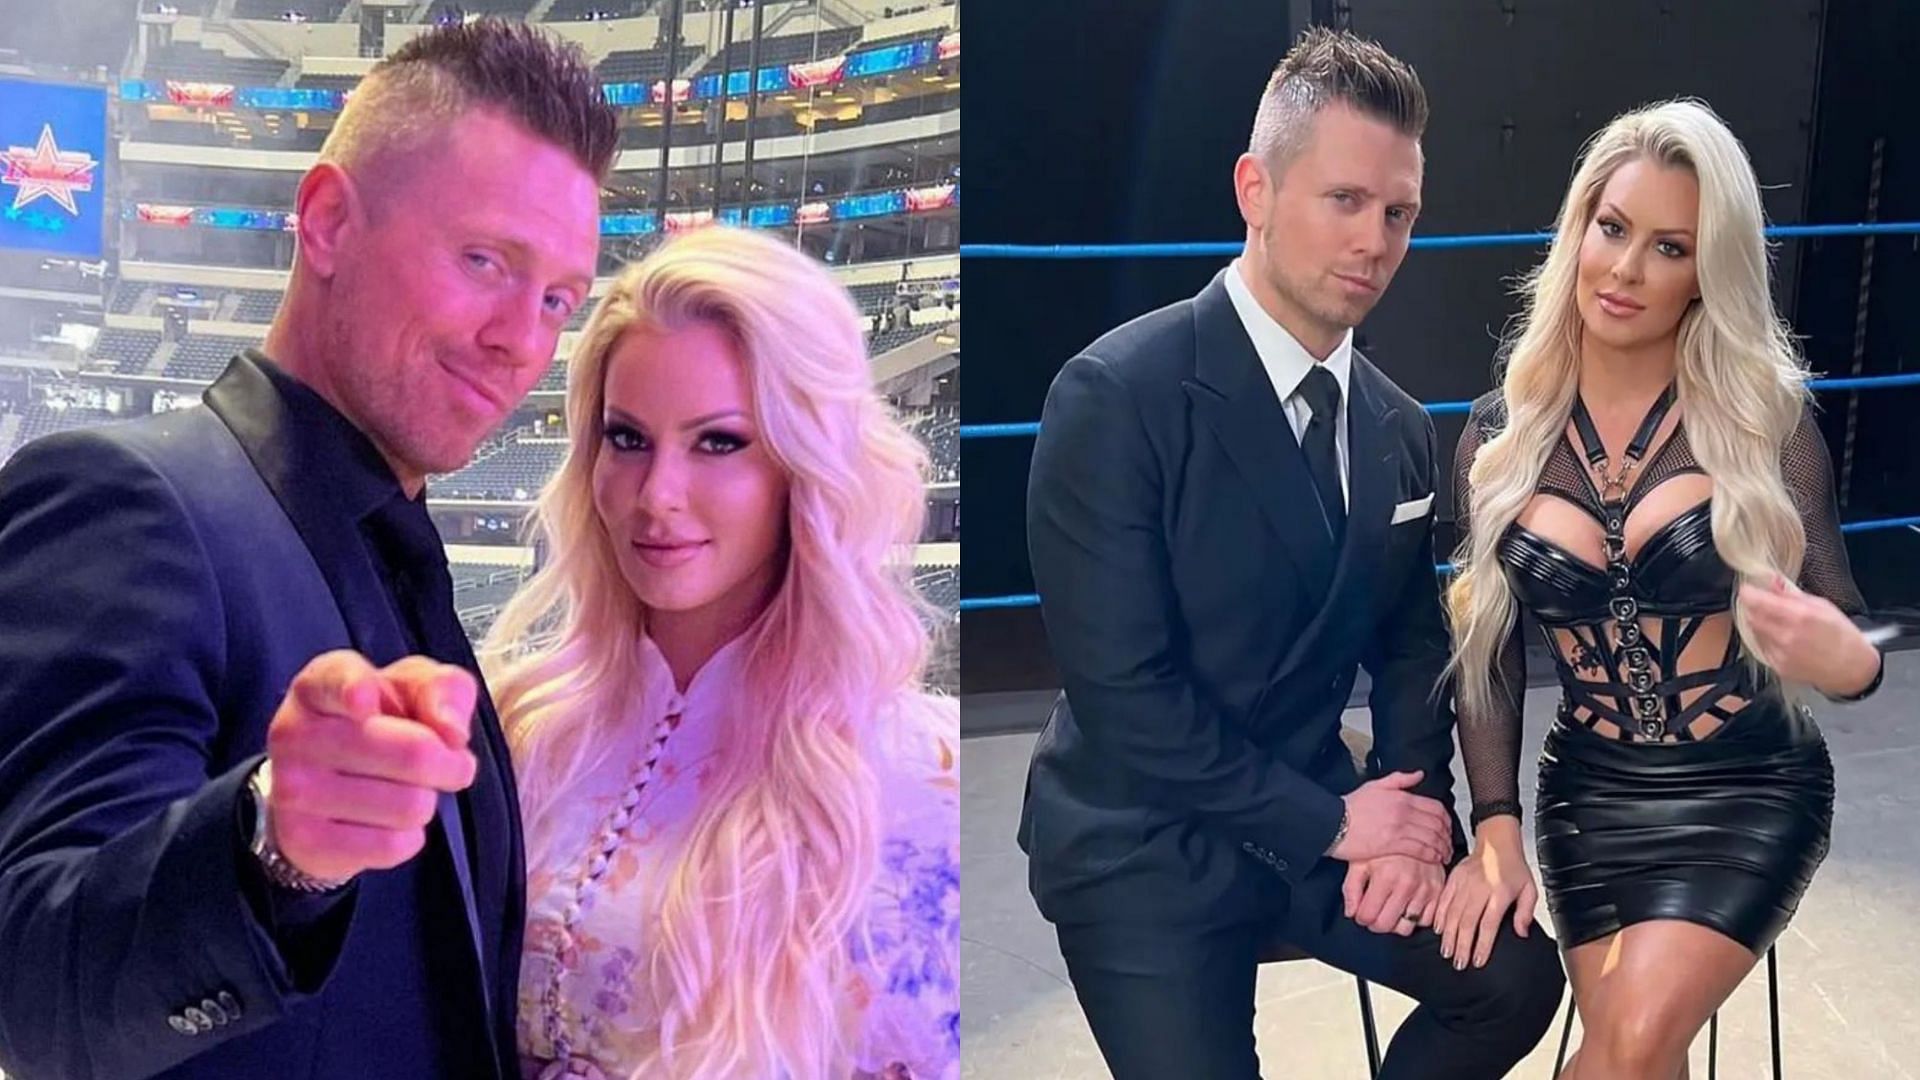 The Miz and Maryse have won several championships